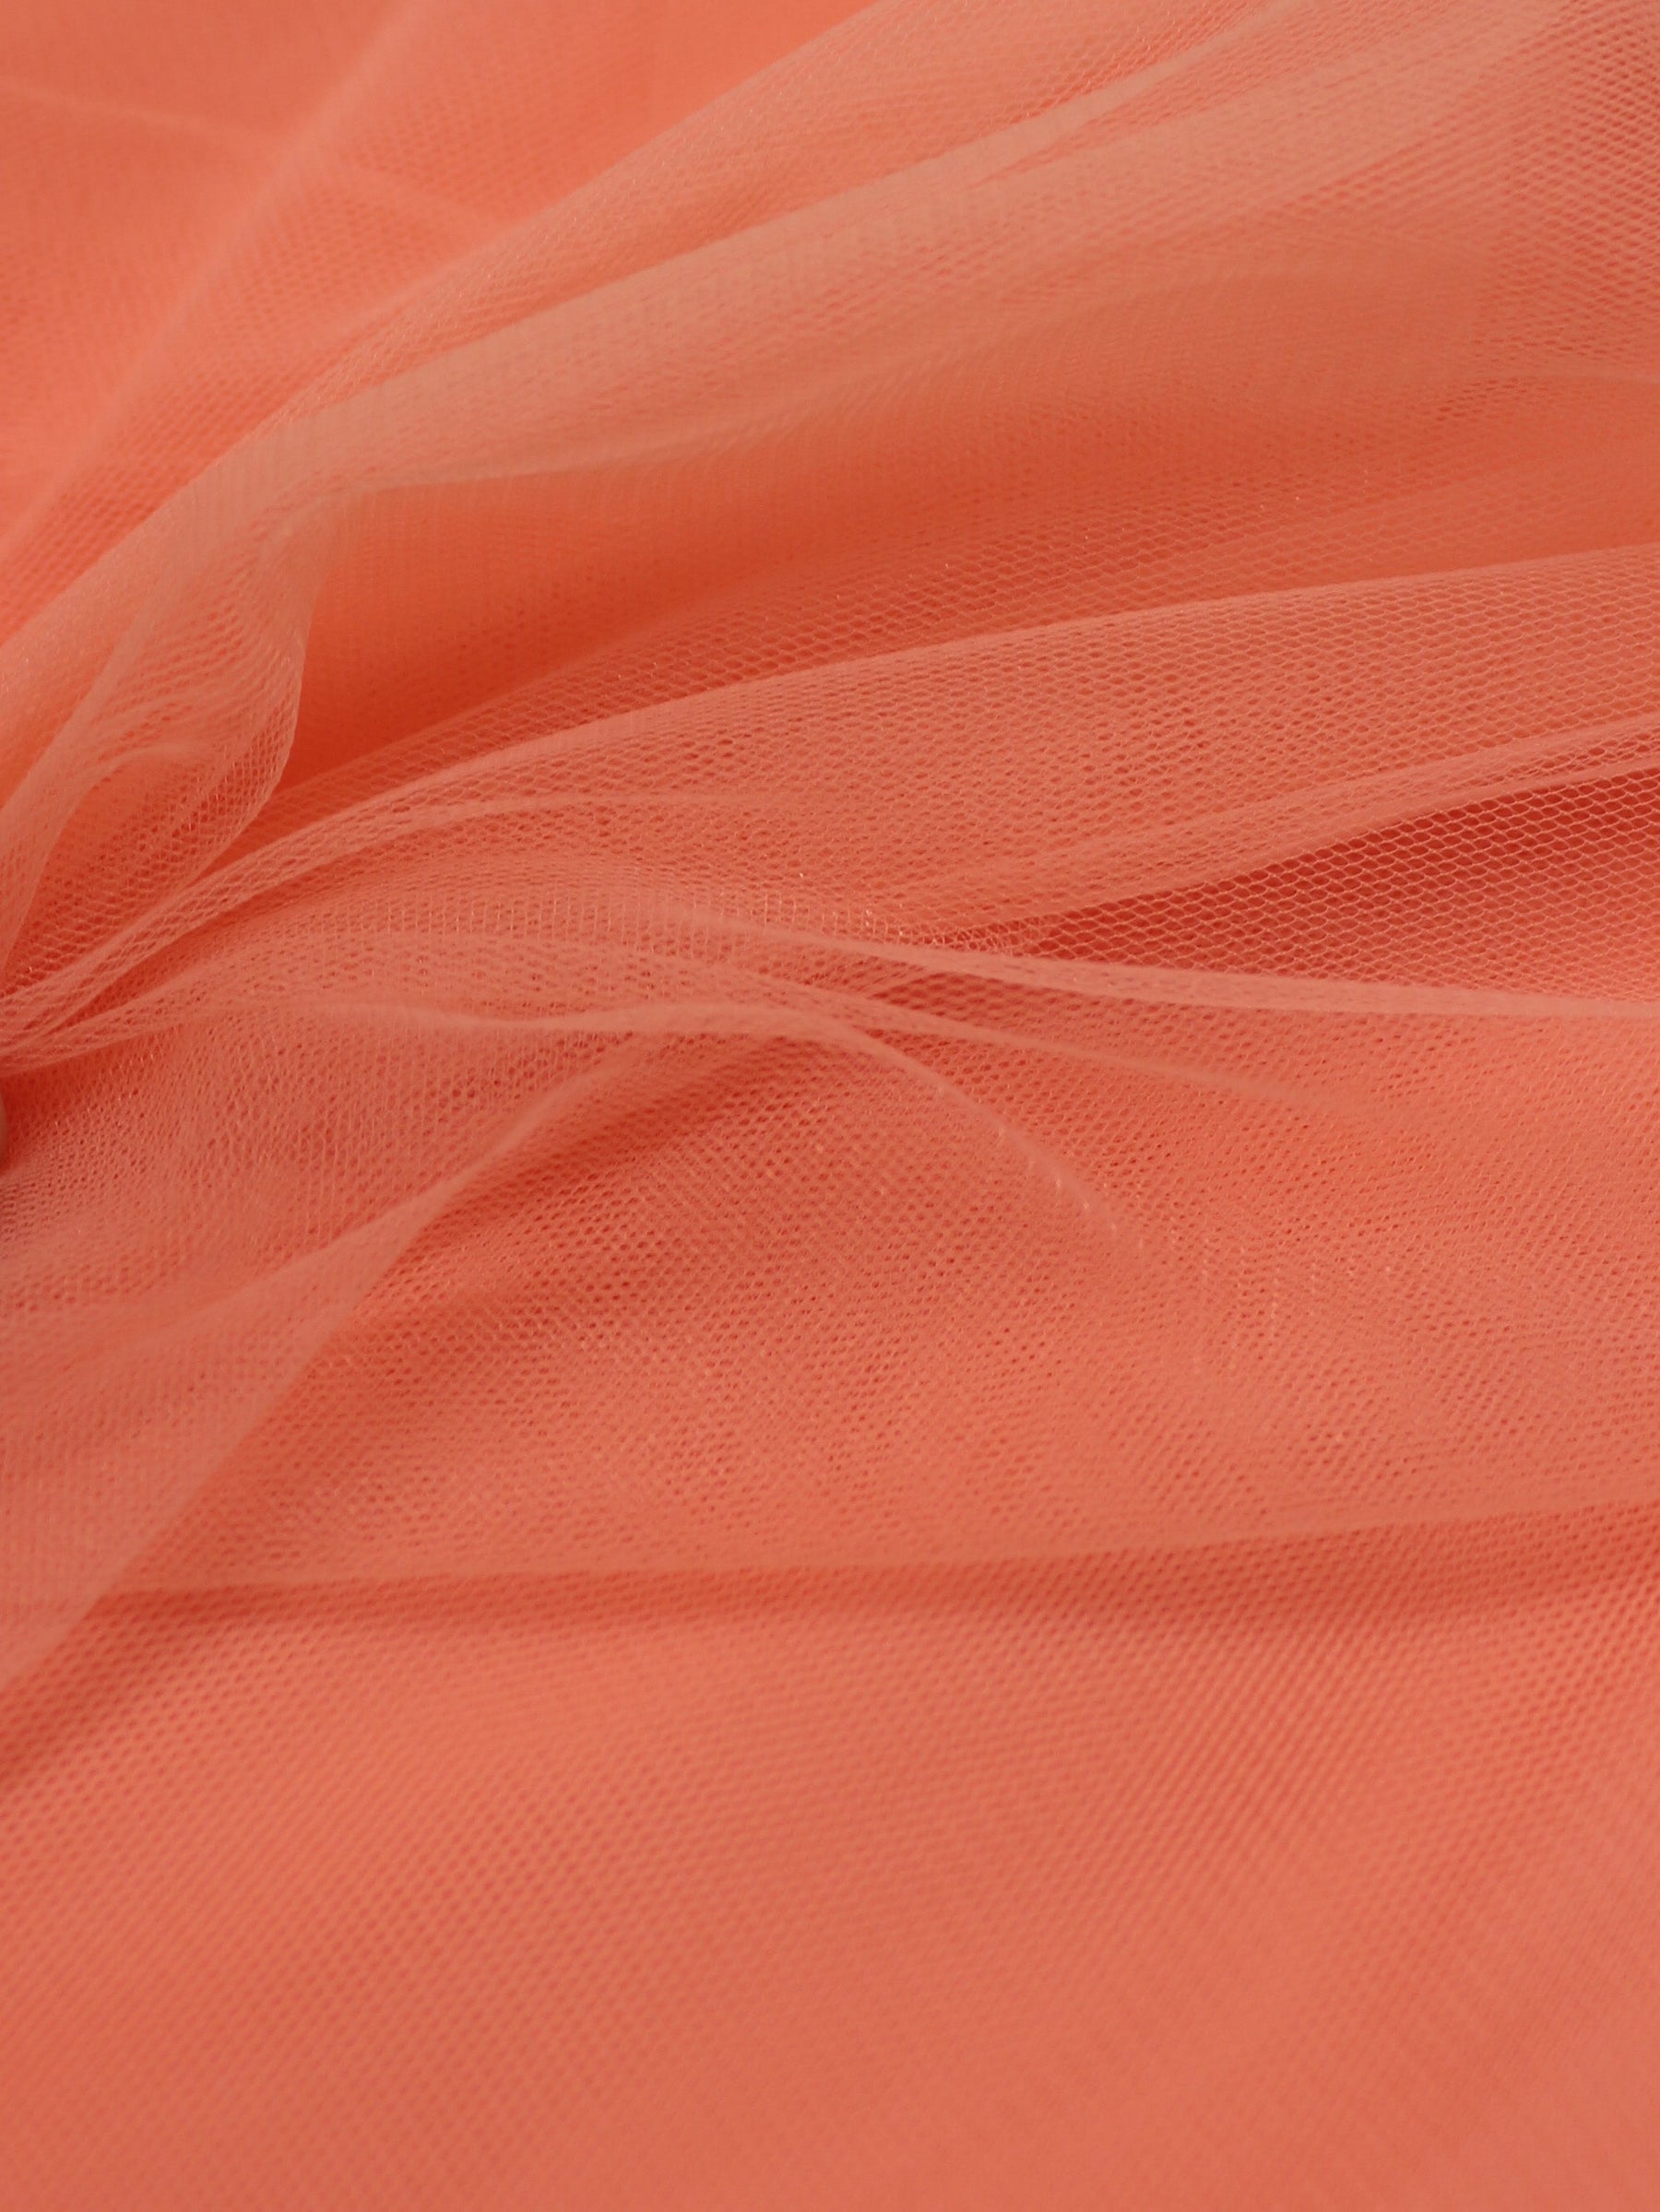 Coral Stretch Soft Tulle - Impetus